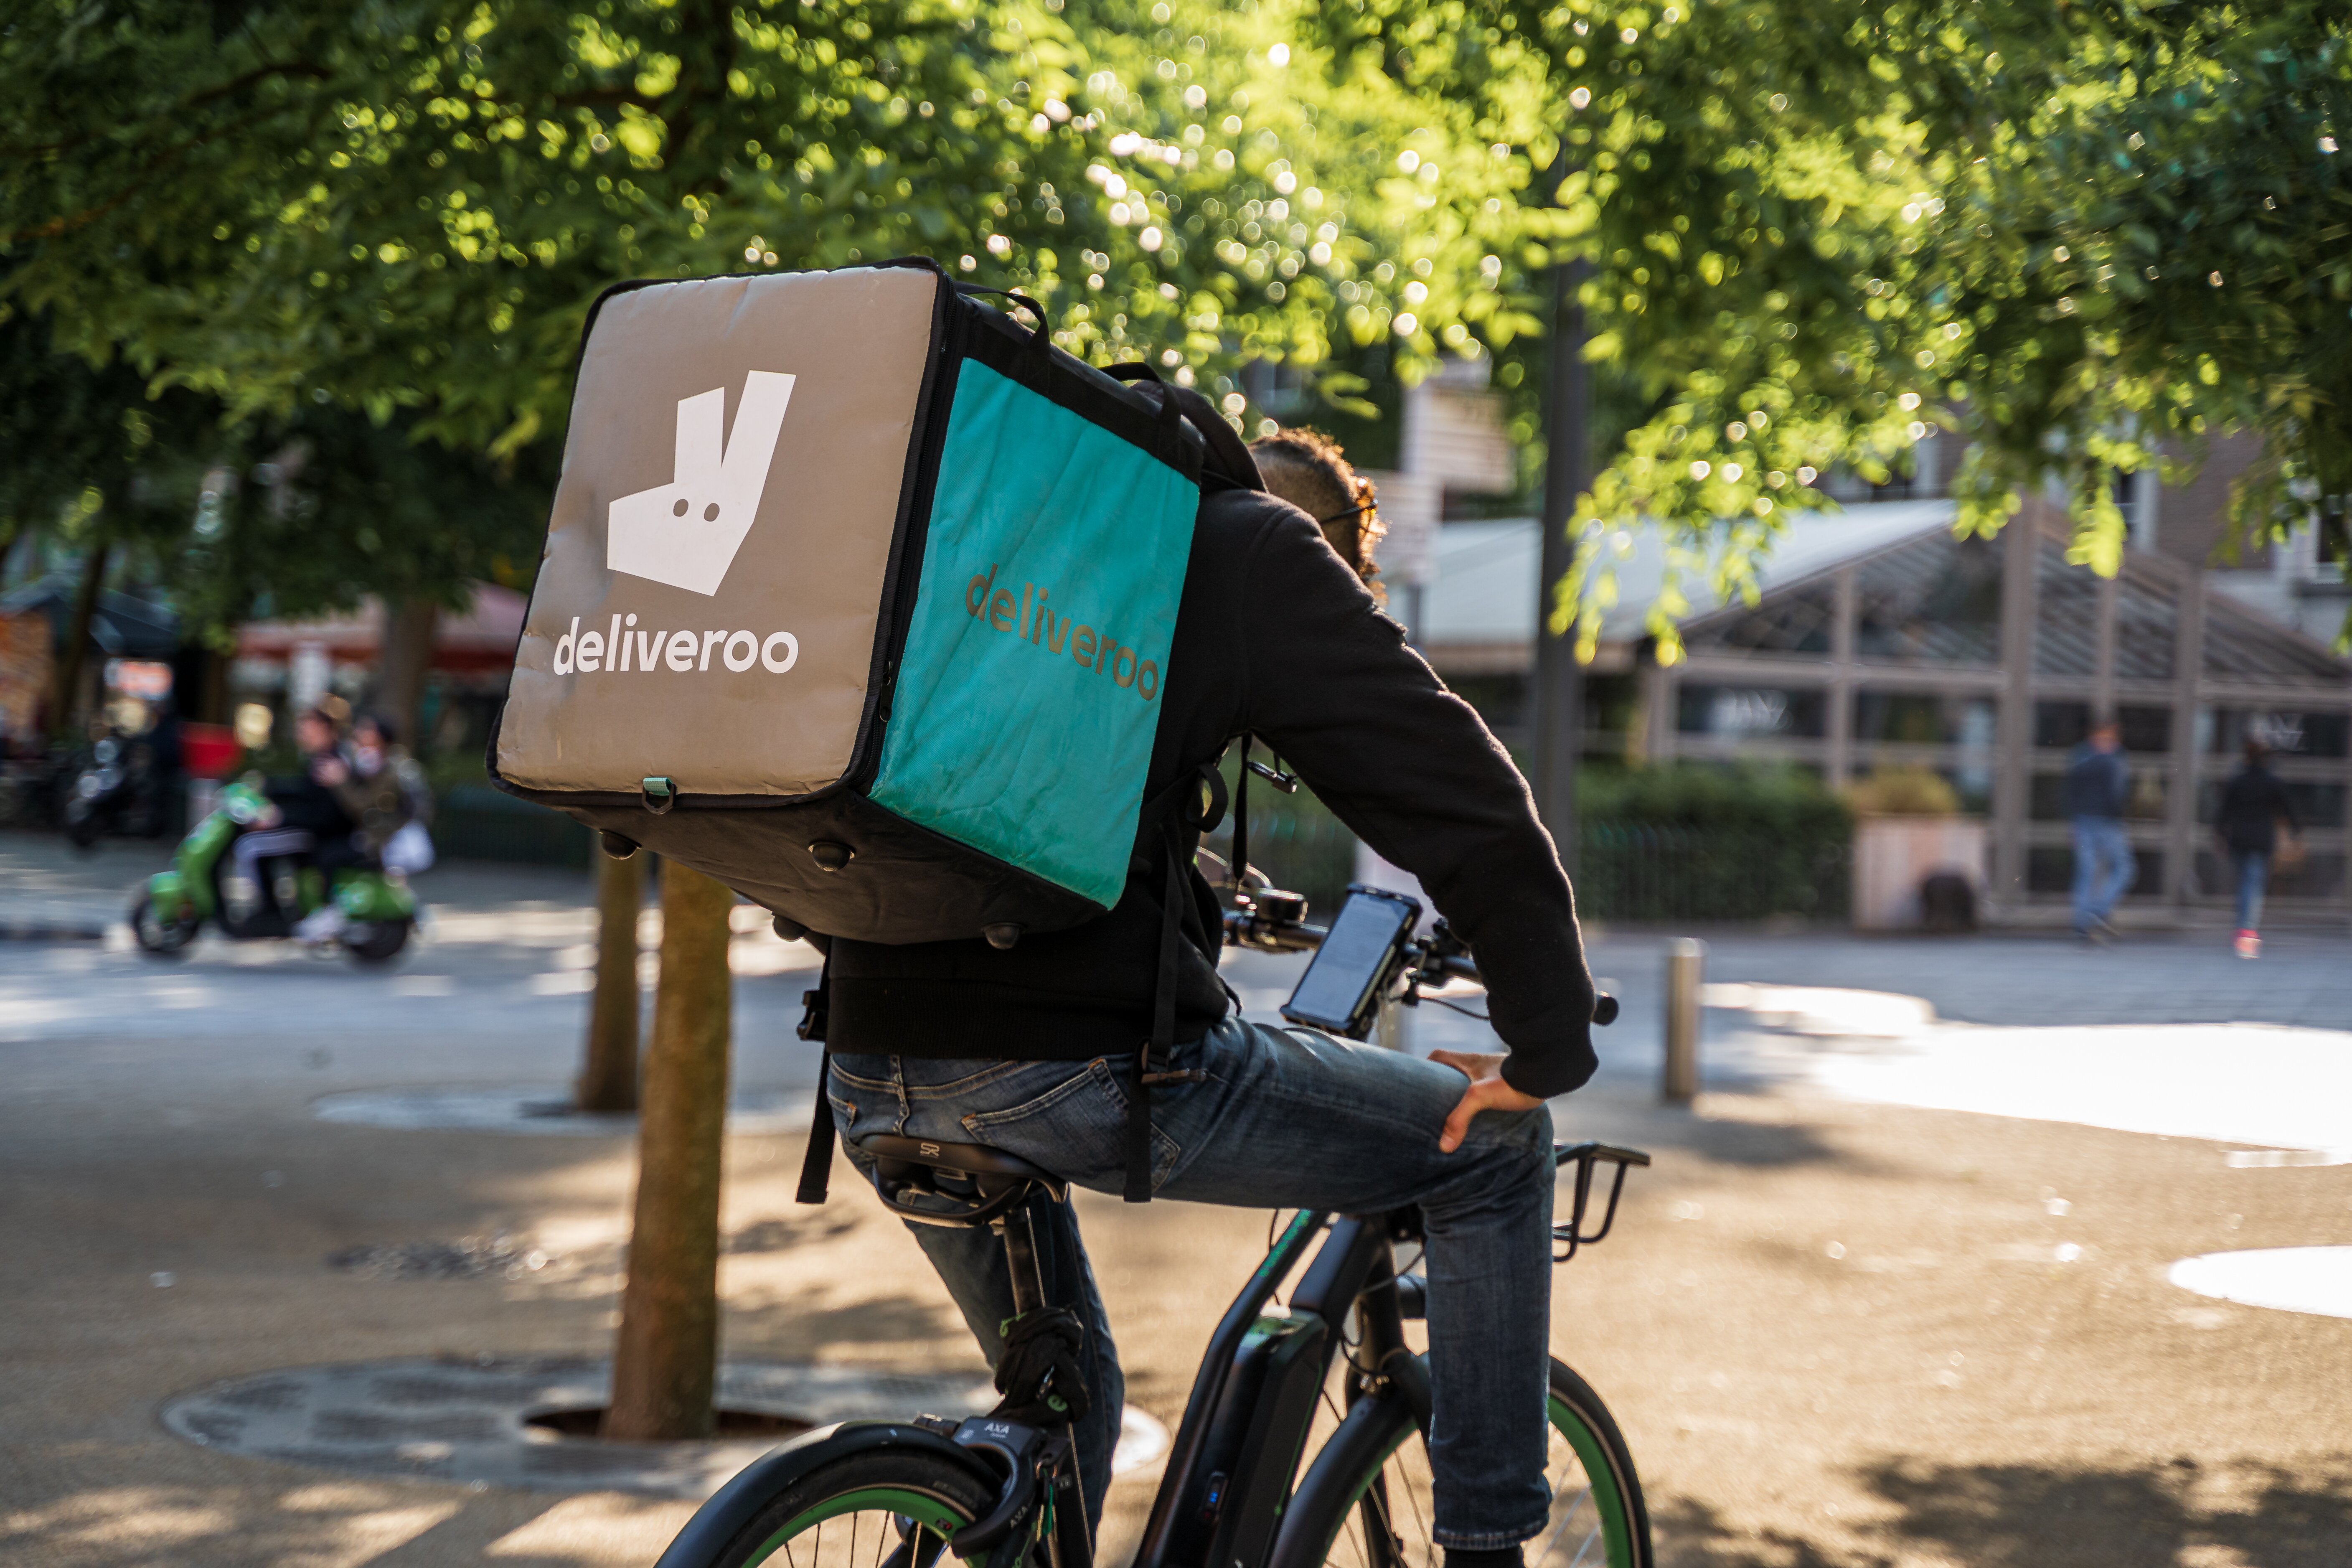 Deliveroo serves up strong UK performance in Q3